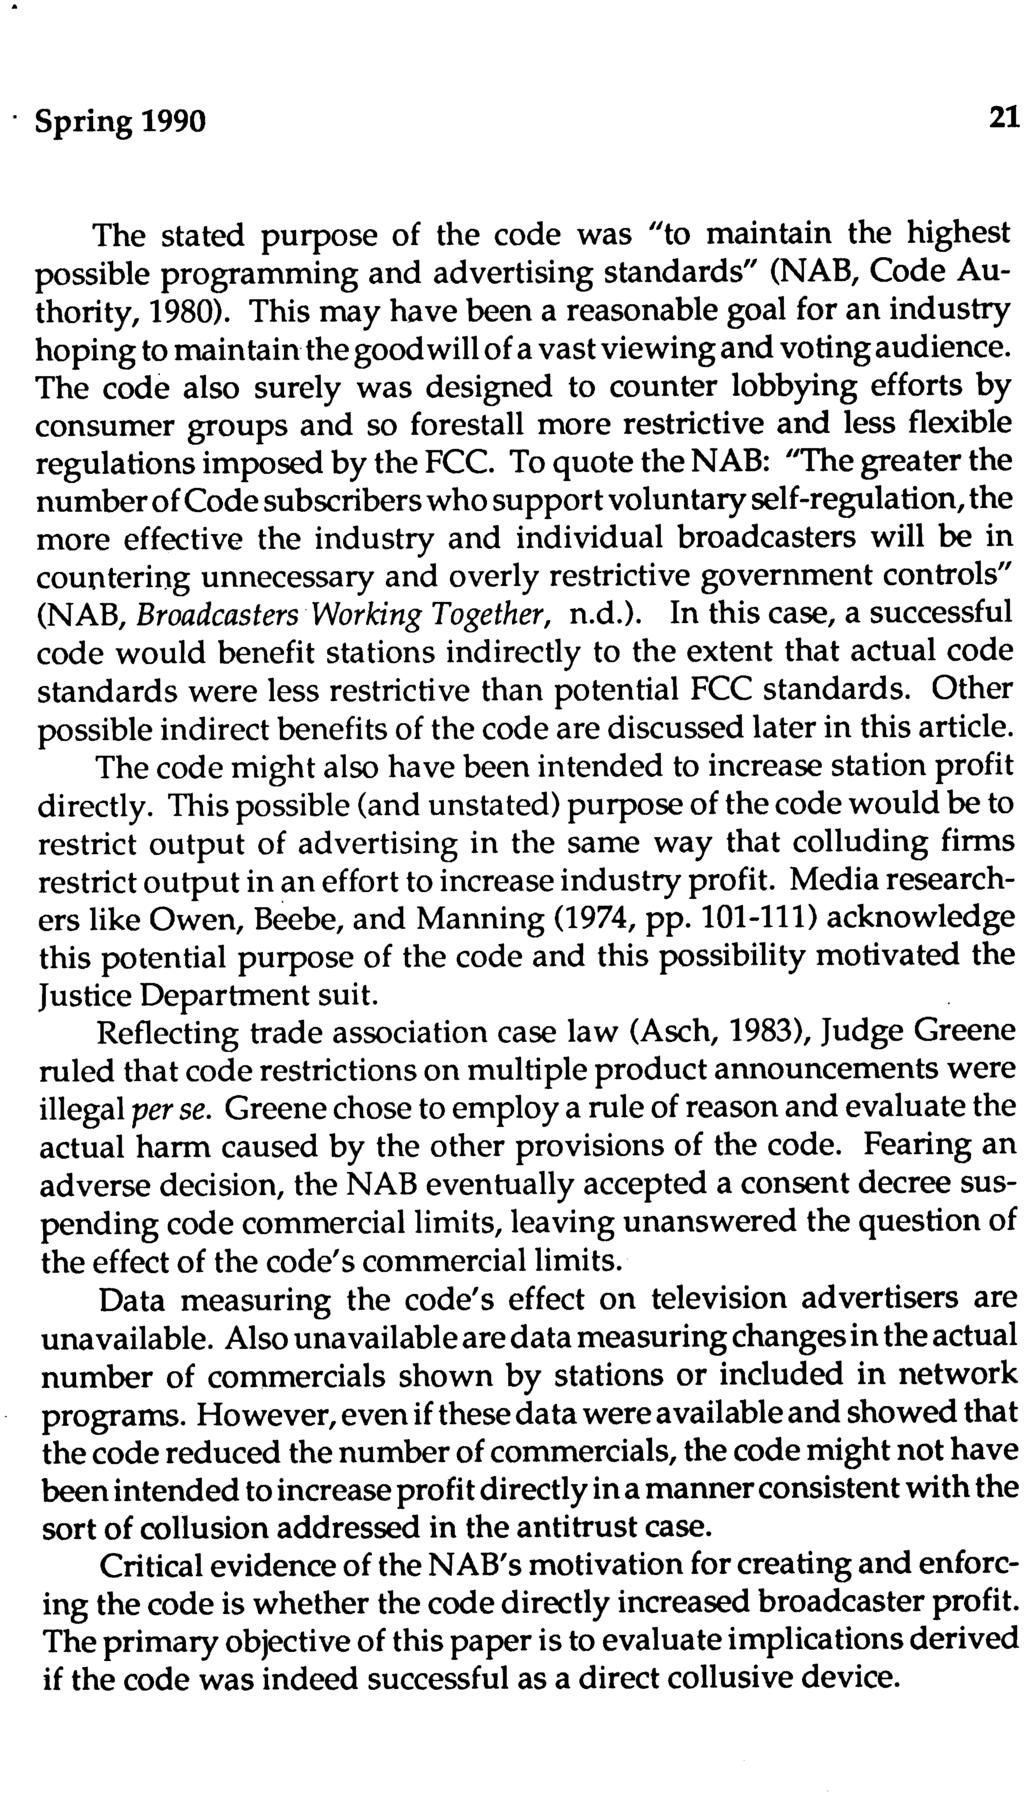 Spring 1990 21 The stated purpose of the code was "to maintain the highest possible programming and advertising standards" (NAB, Code Authority,1980).